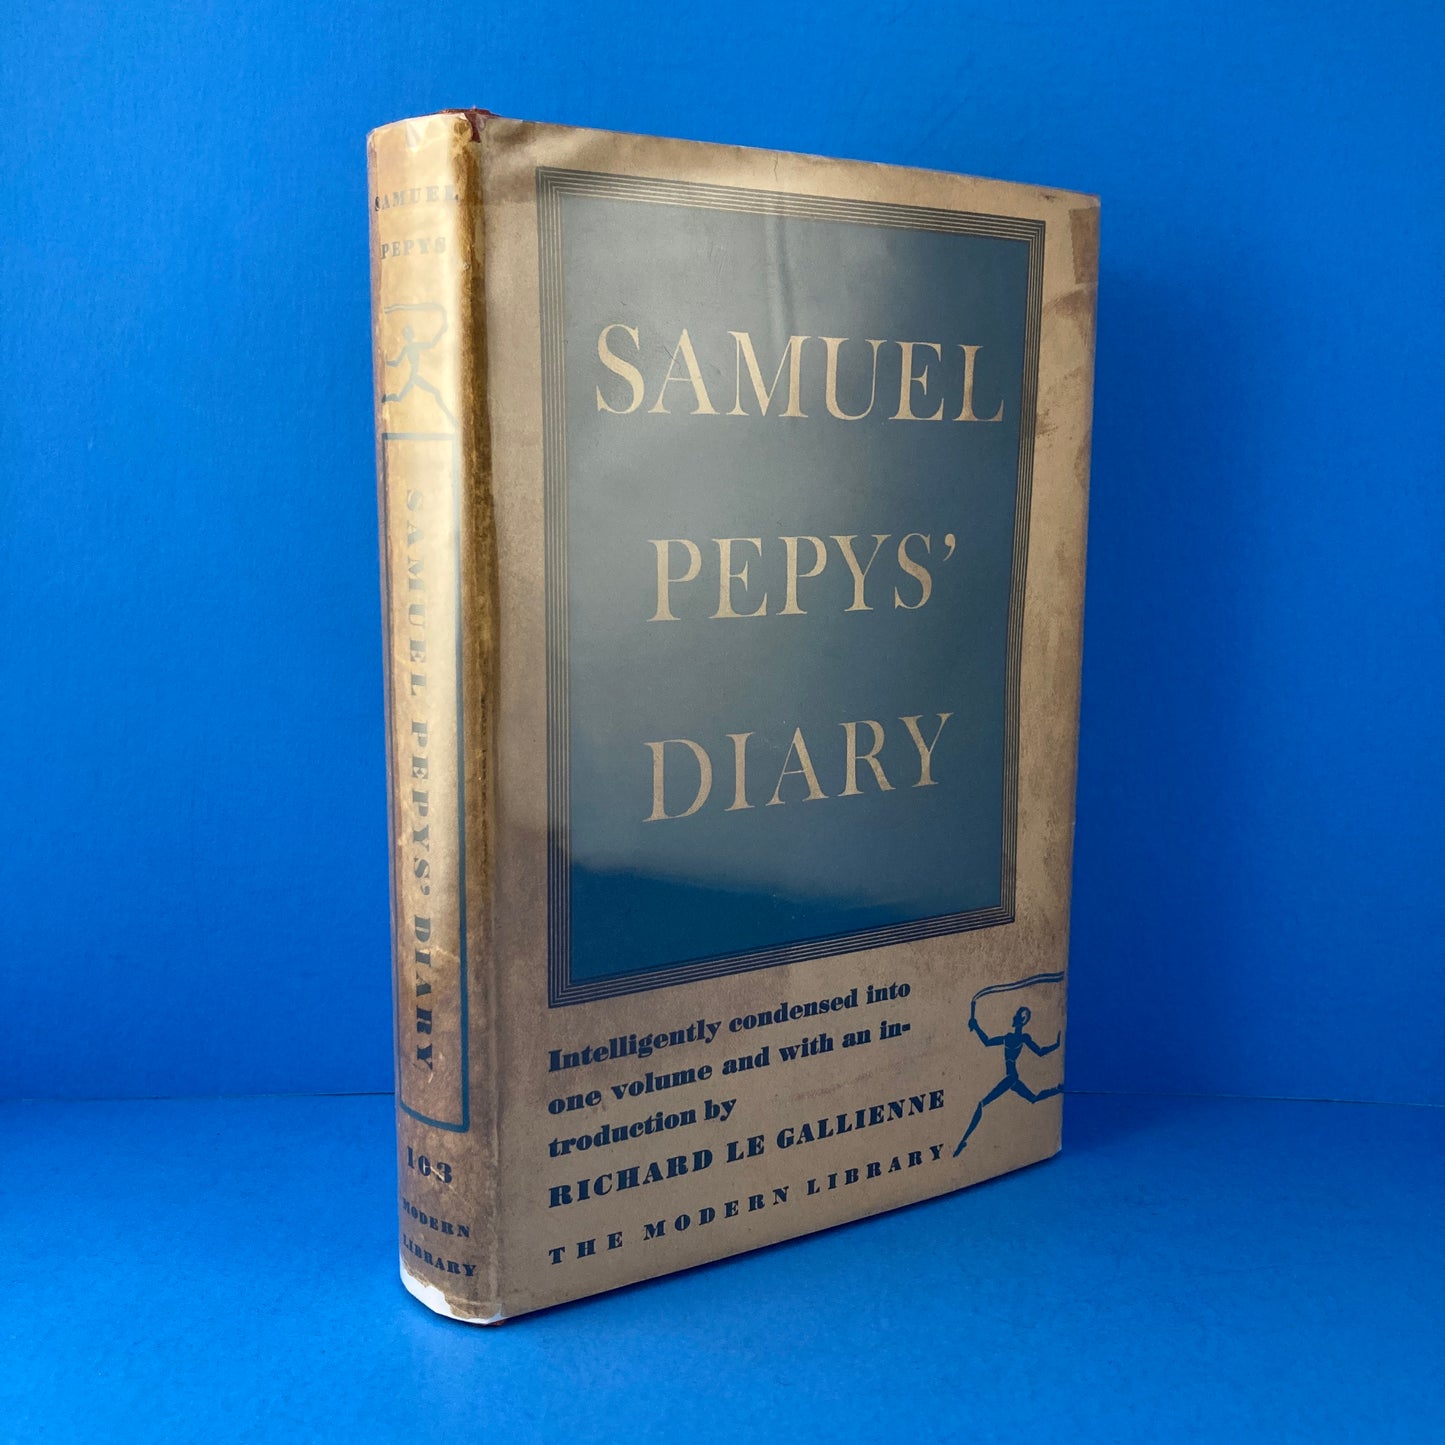 Passages From the Diary of Samuel Pepys